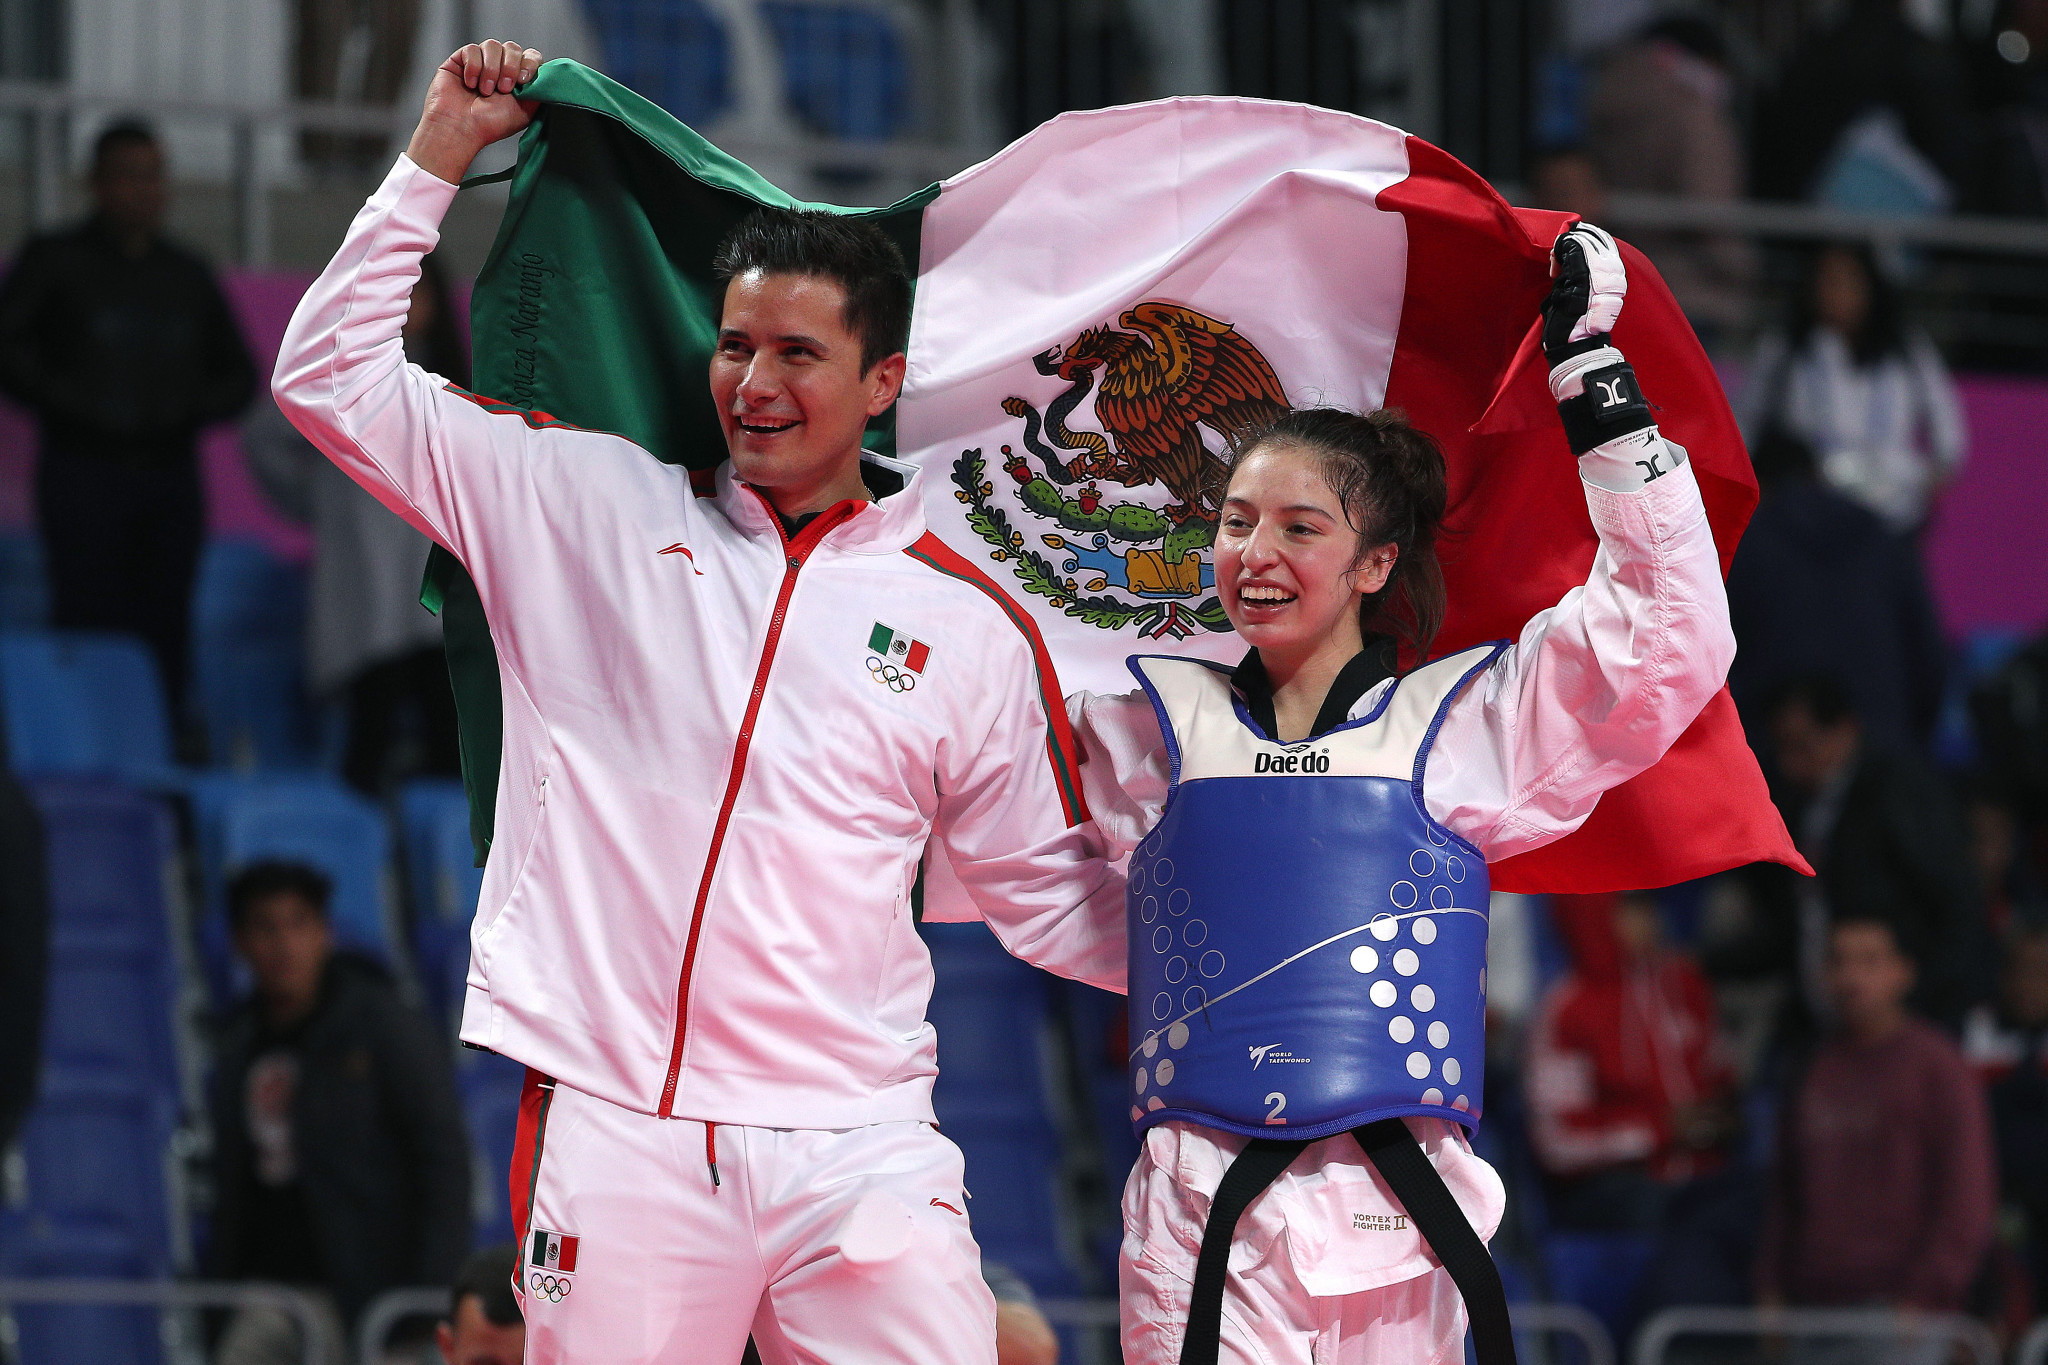 Daniela Souza won one of Mexico's four taekwondo gold medals at the Lima 2019 Pan American Games ©Getty Images